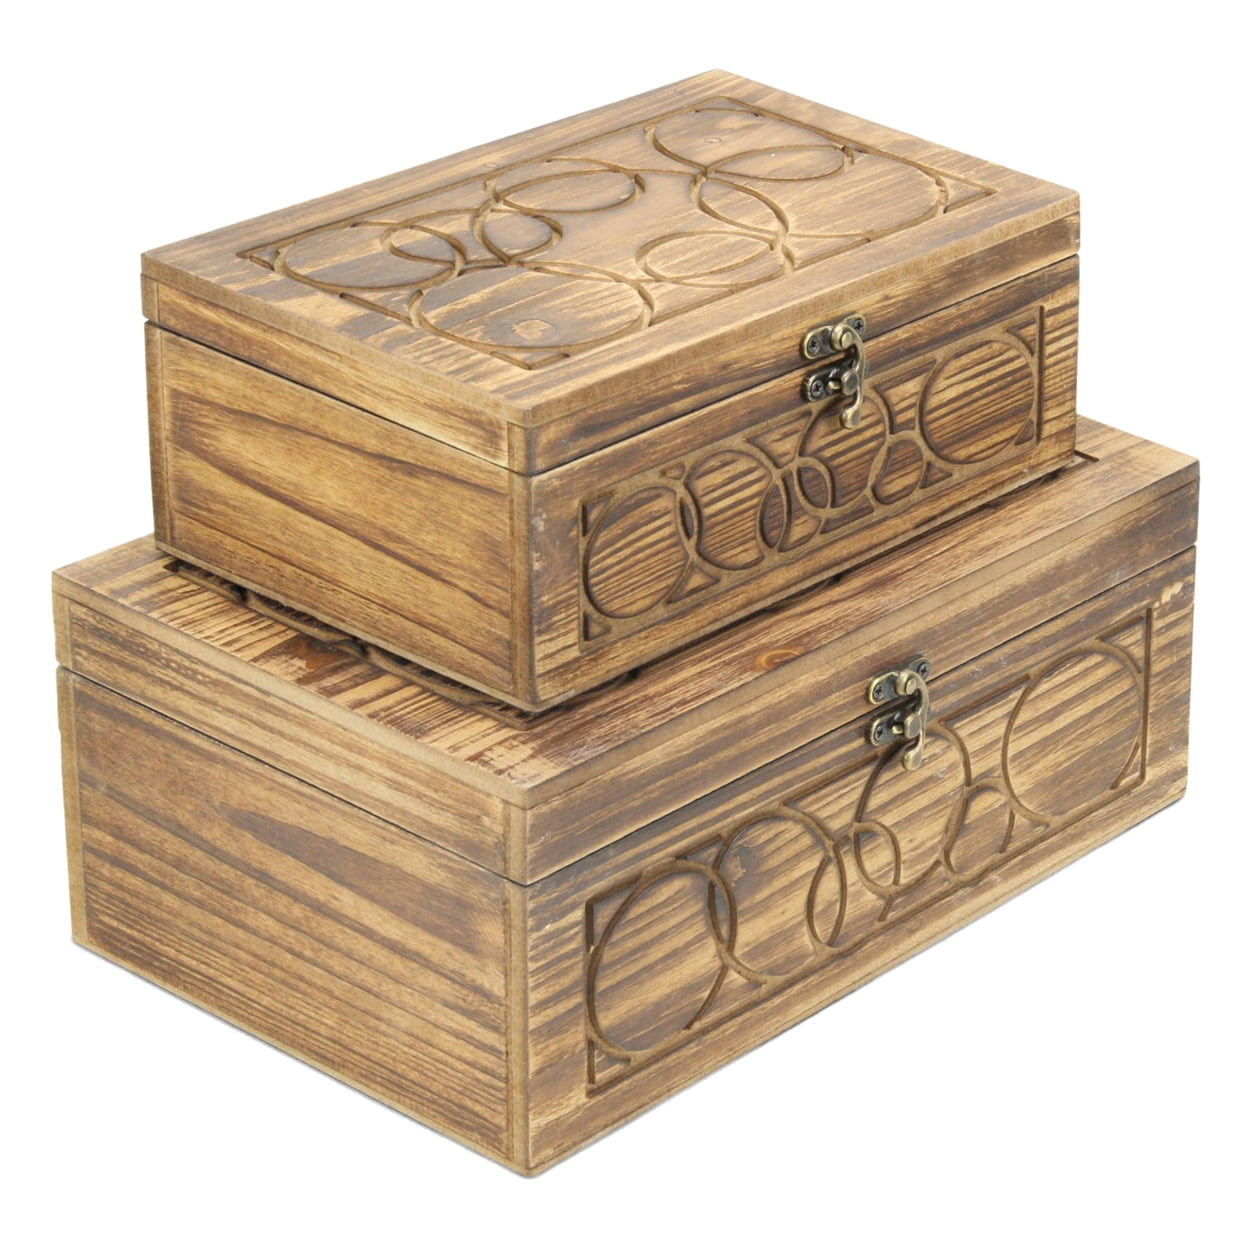 Picture of Cheungs 5398-2 Natural Wood Storage Boxes in A Dark Brown Finish - Set of 2